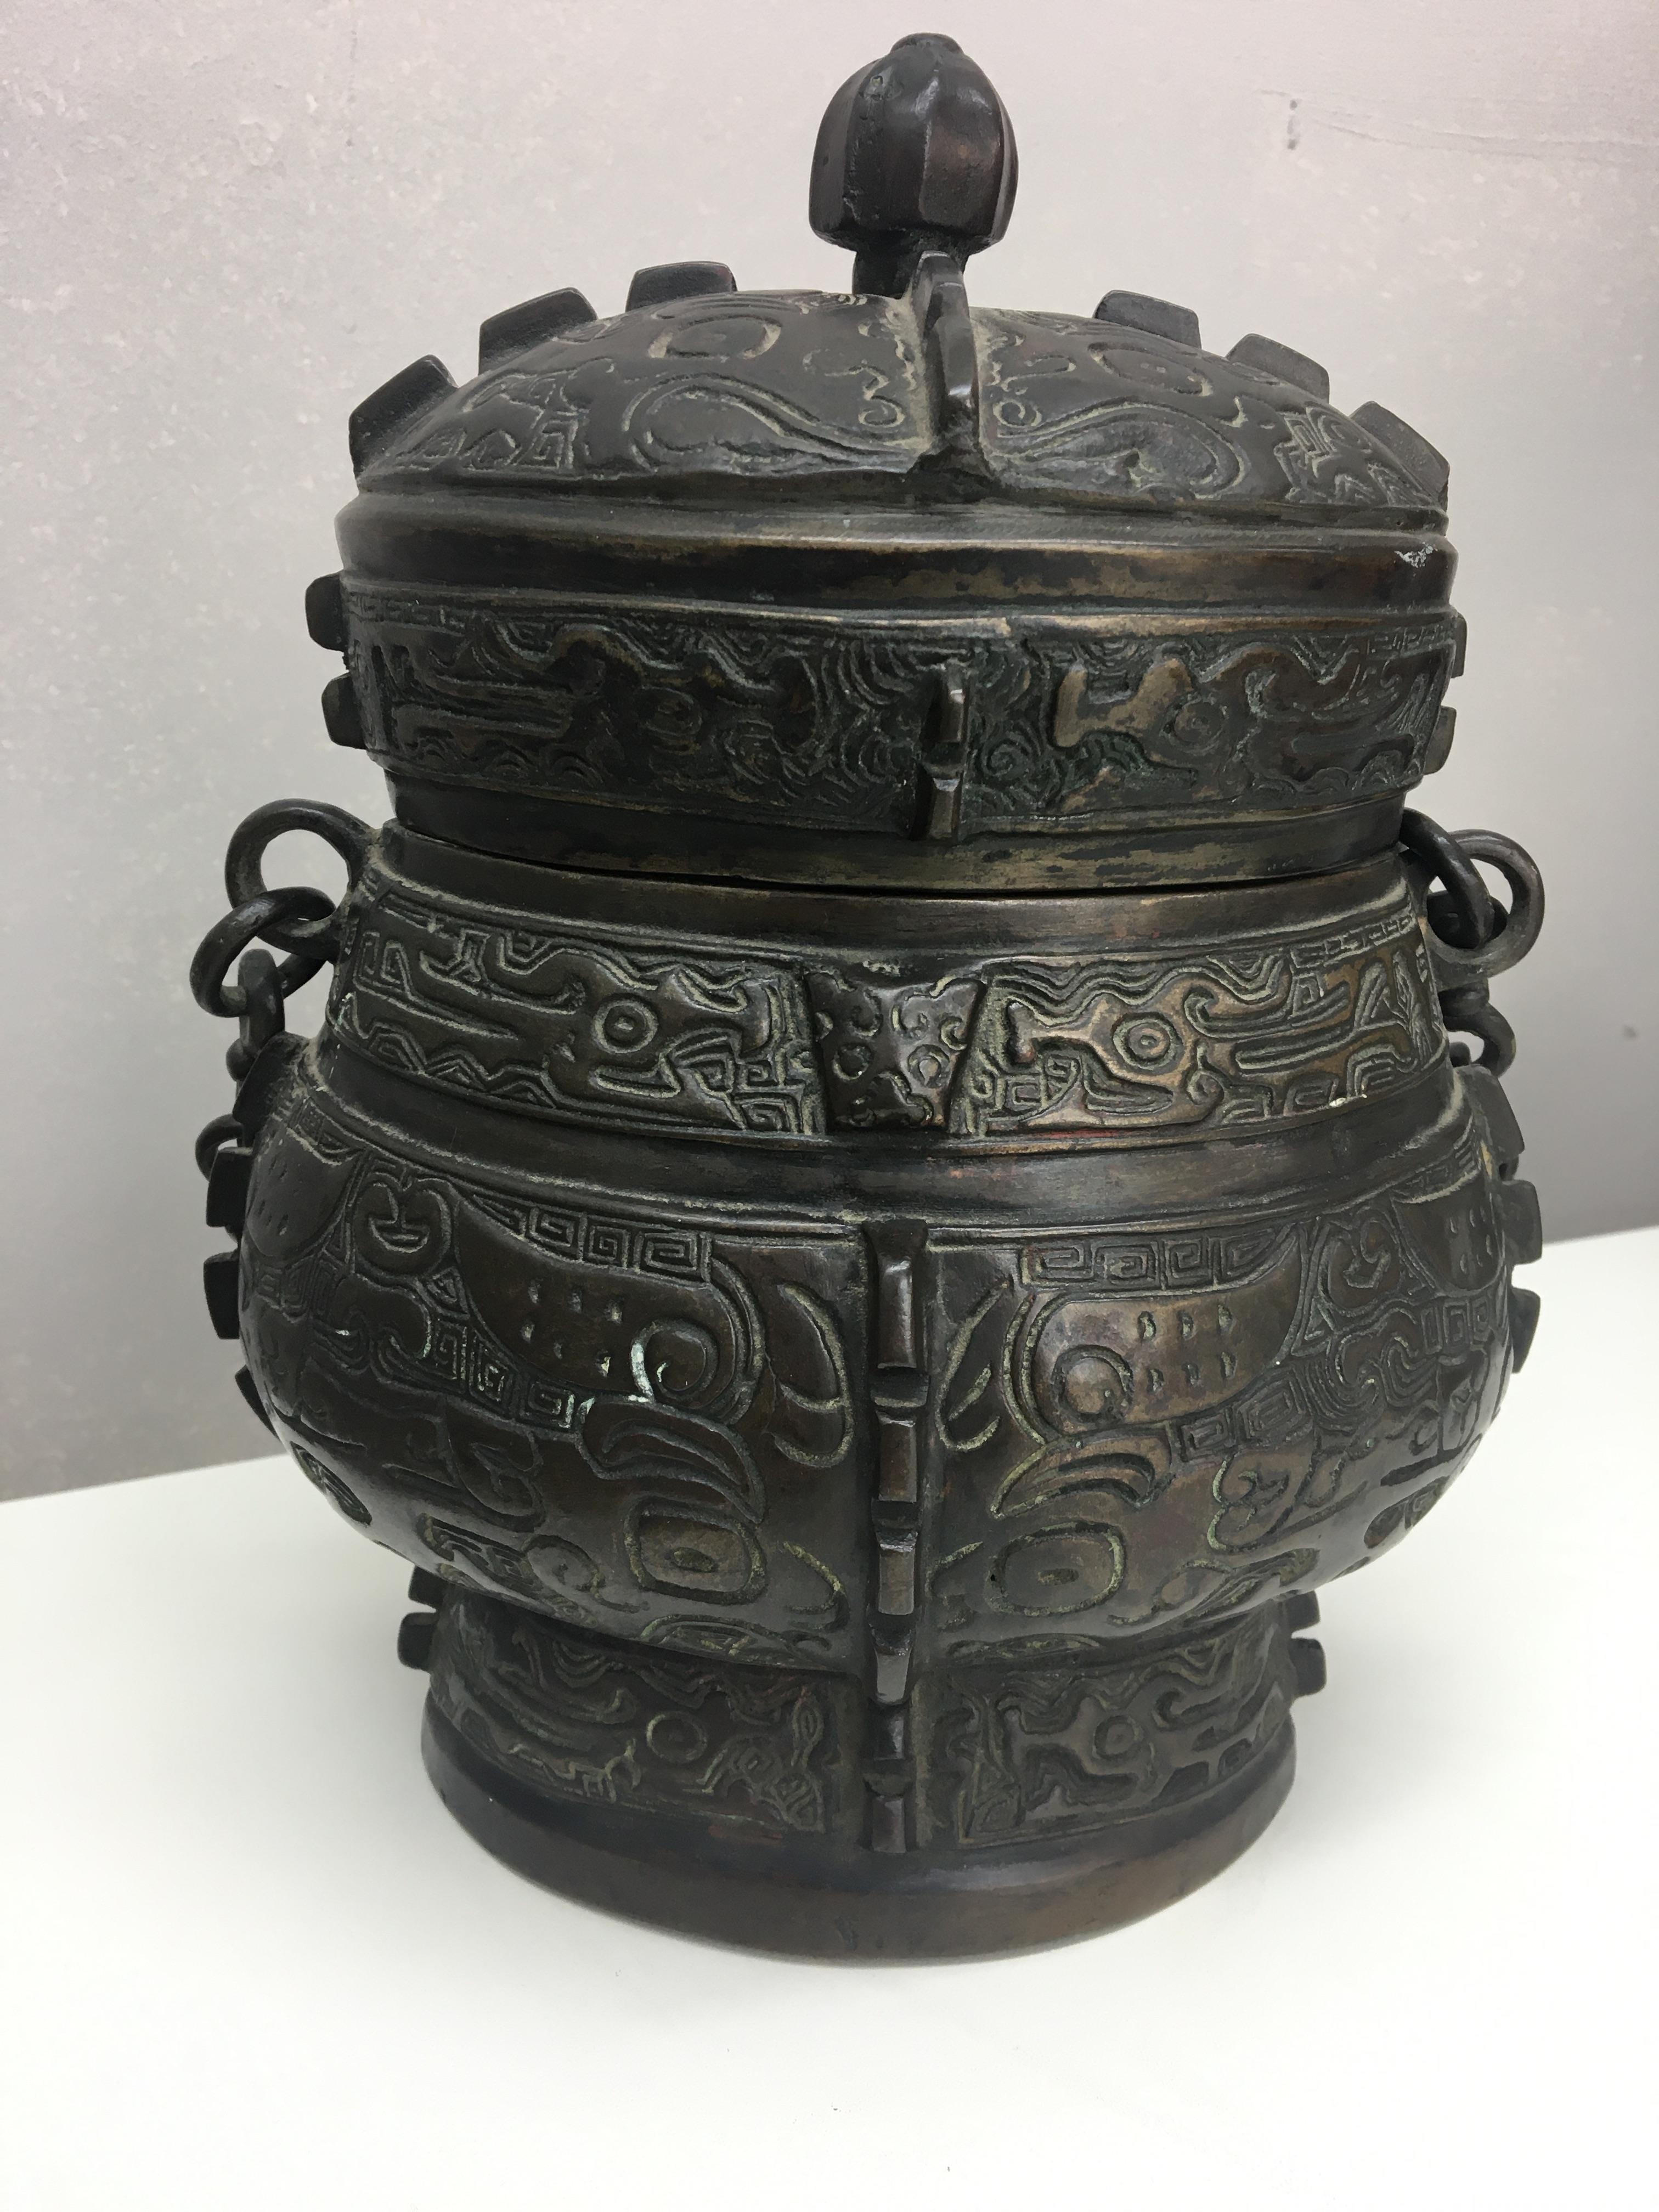 Archaic Bronze Qing Dynasty ceremonial wine vessel - Image 2 of 9